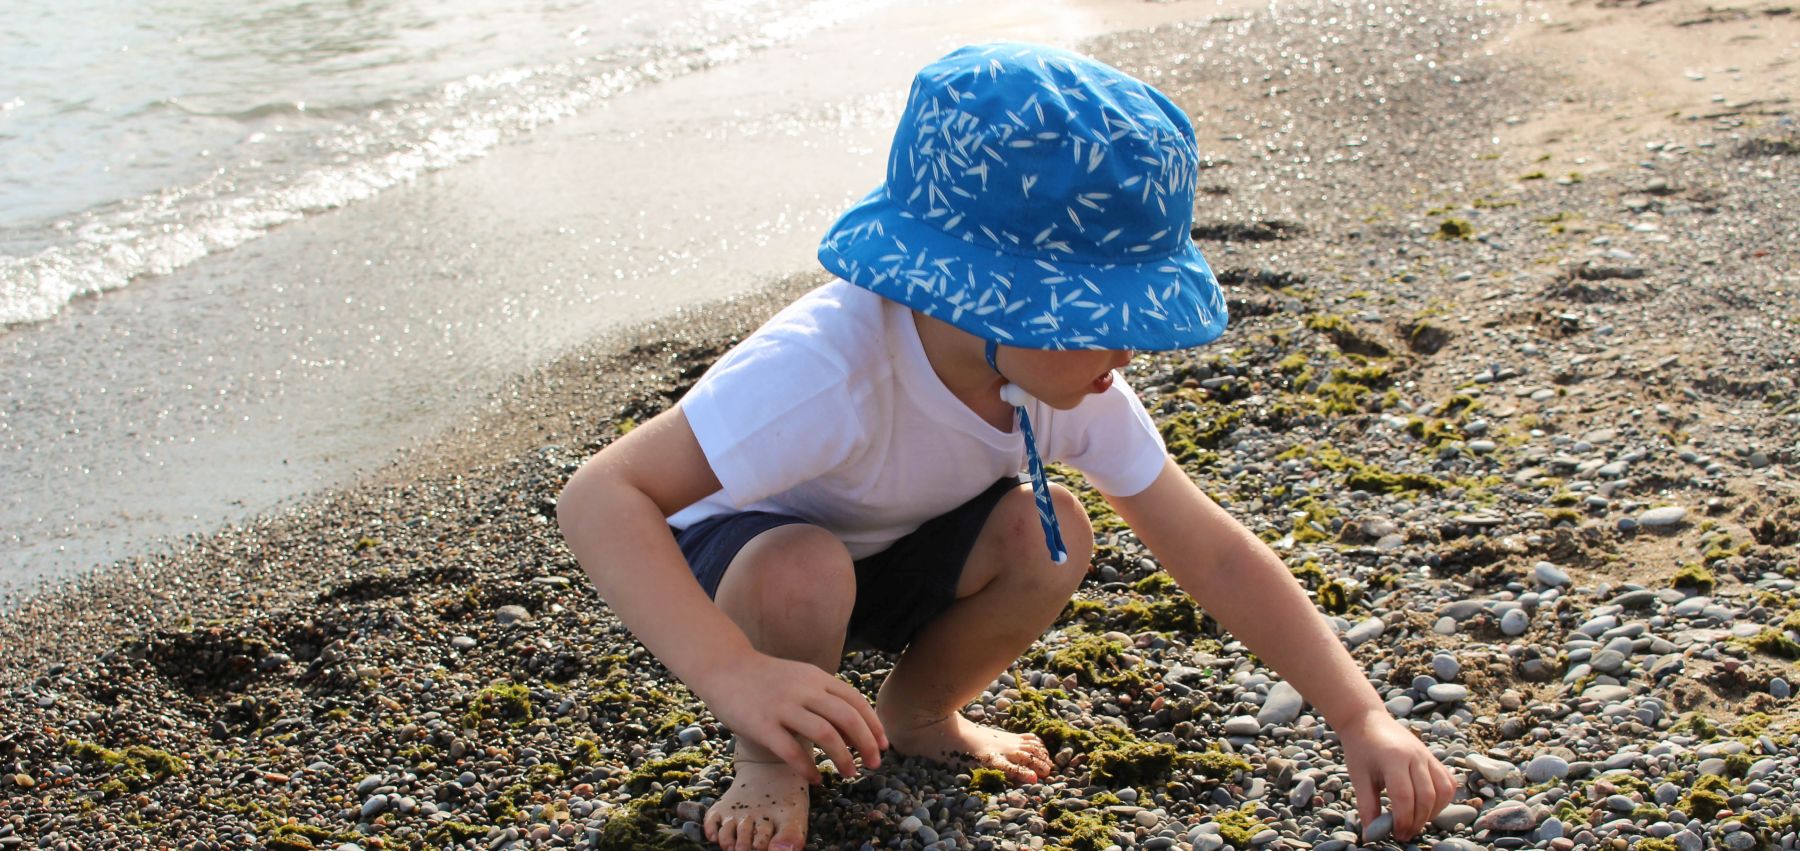 Organic Cotton kids sun hat rated upf50 sun protection the highest rating available-made in canada by puffin gear- minnow print by Charlie Harper